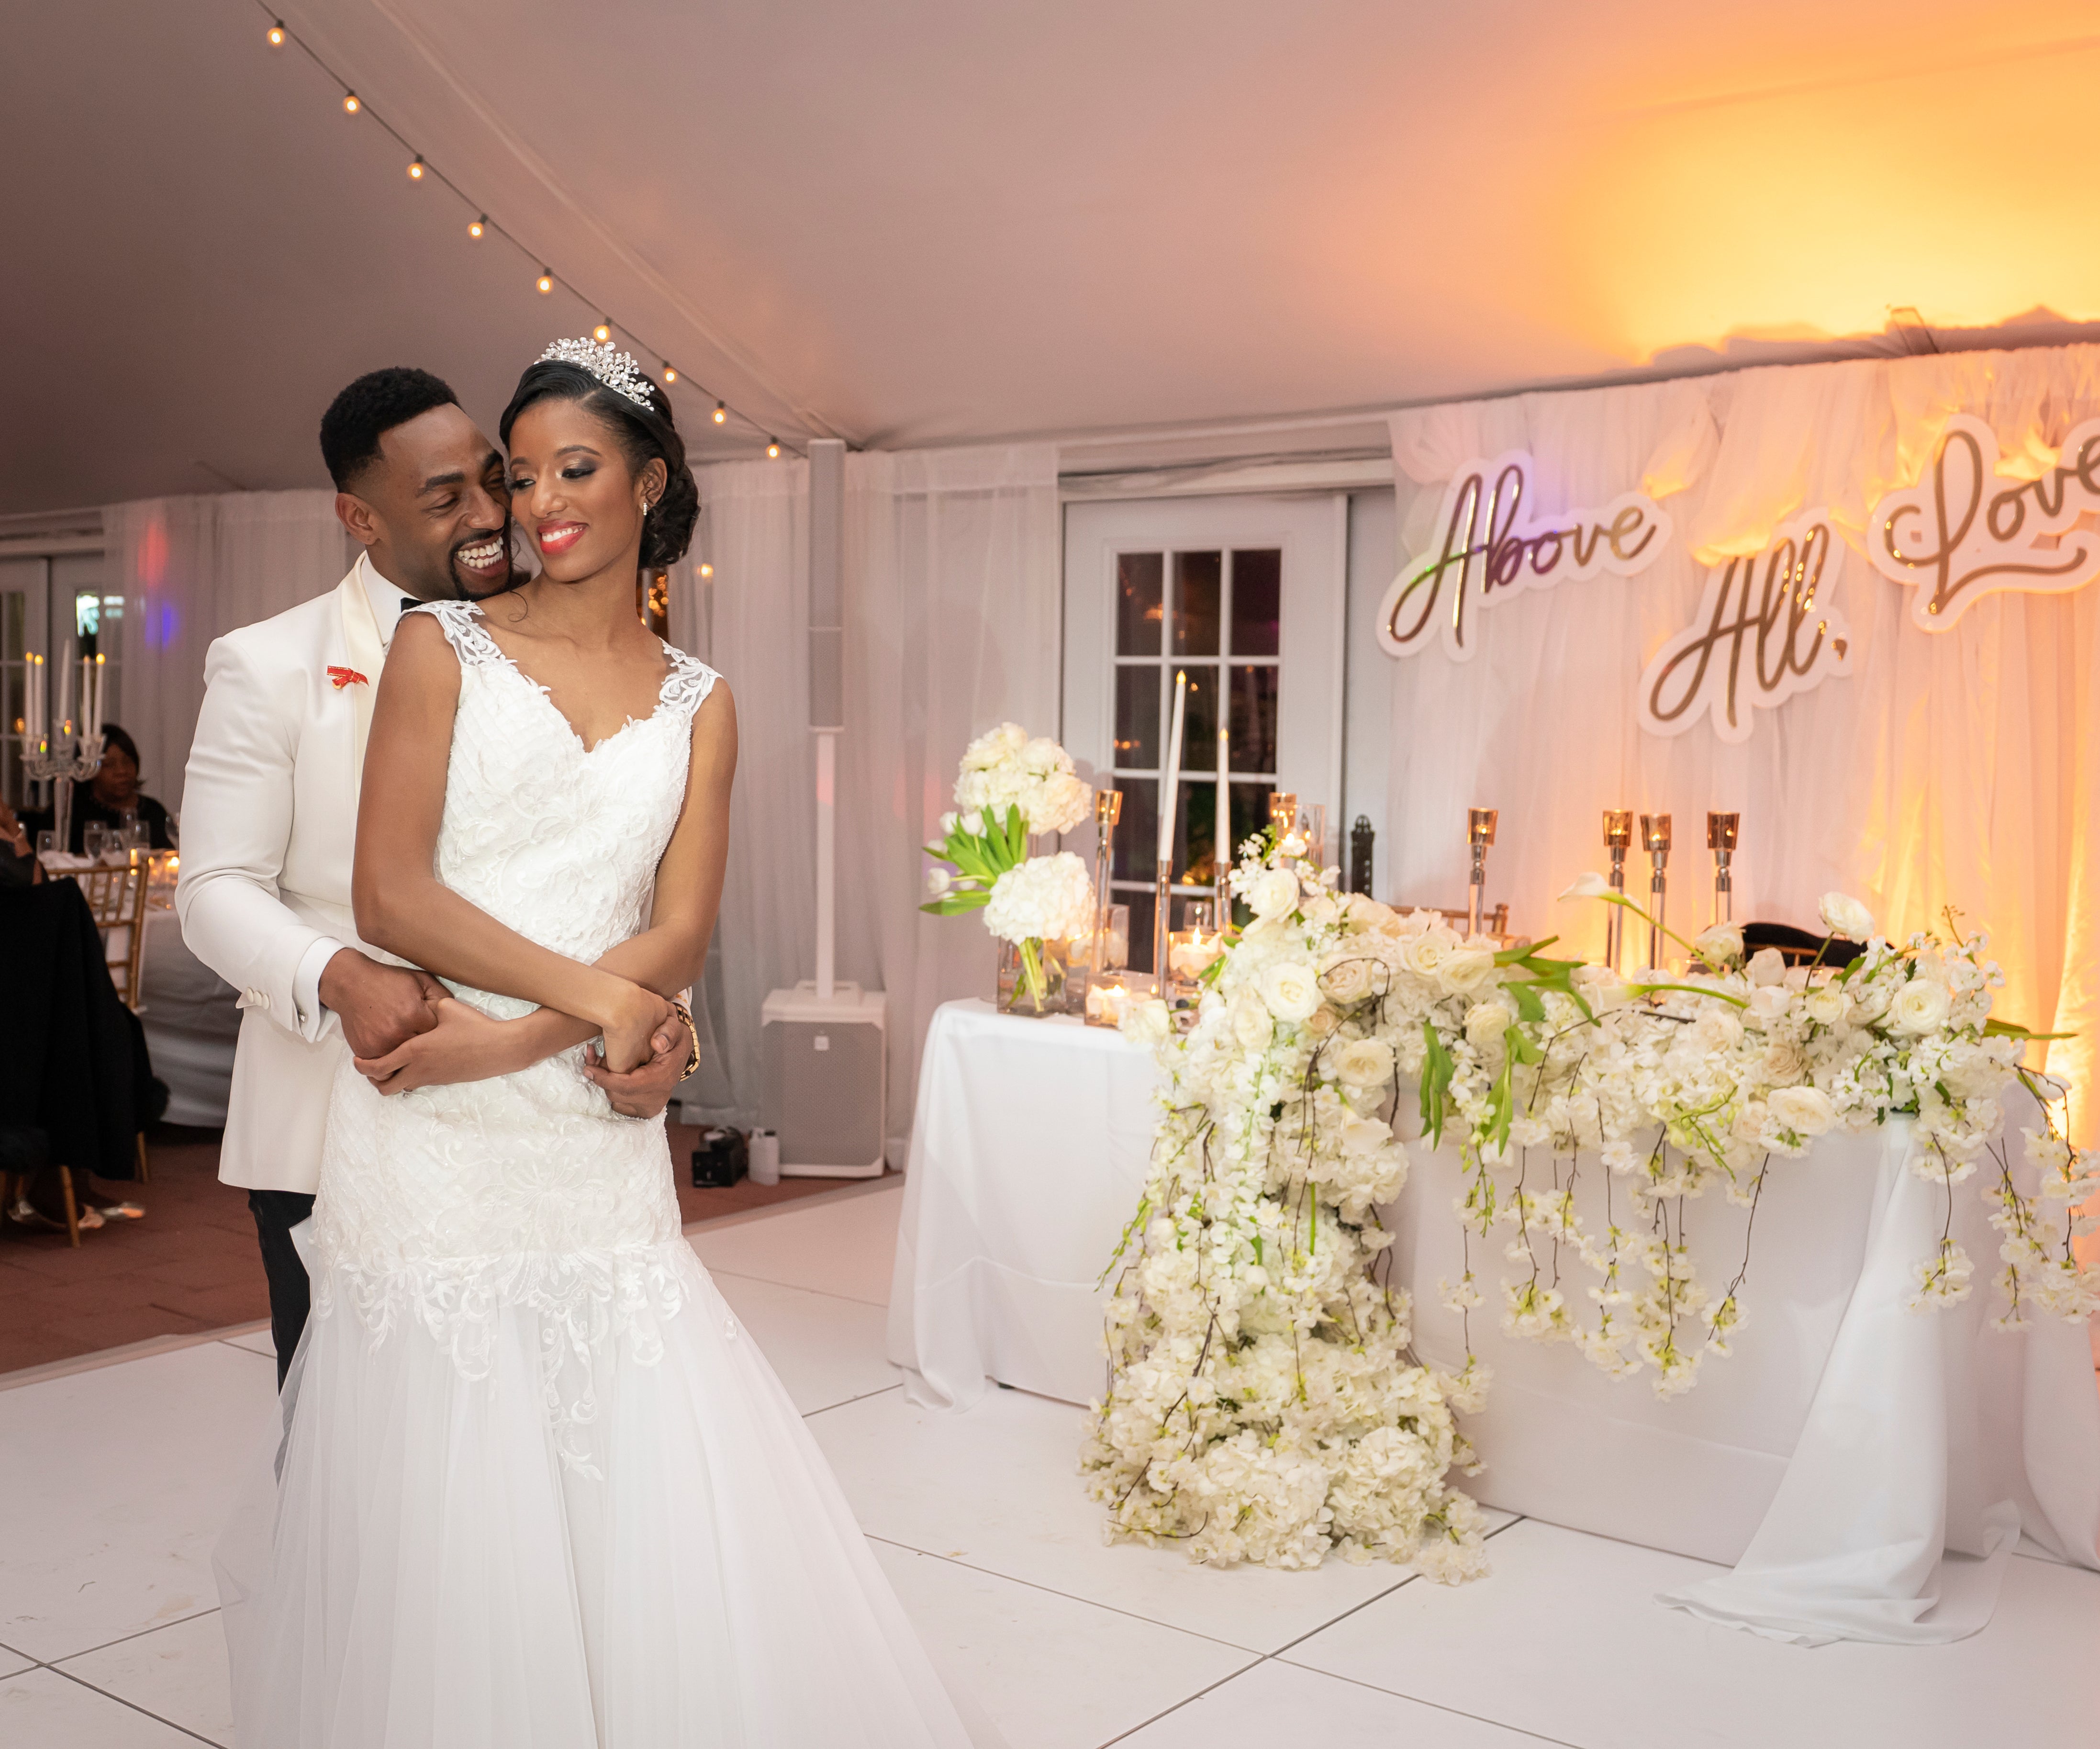 Bridal Bliss: Kornelius and Rachel Came Red-Carpet Ready To Say 'I Do'